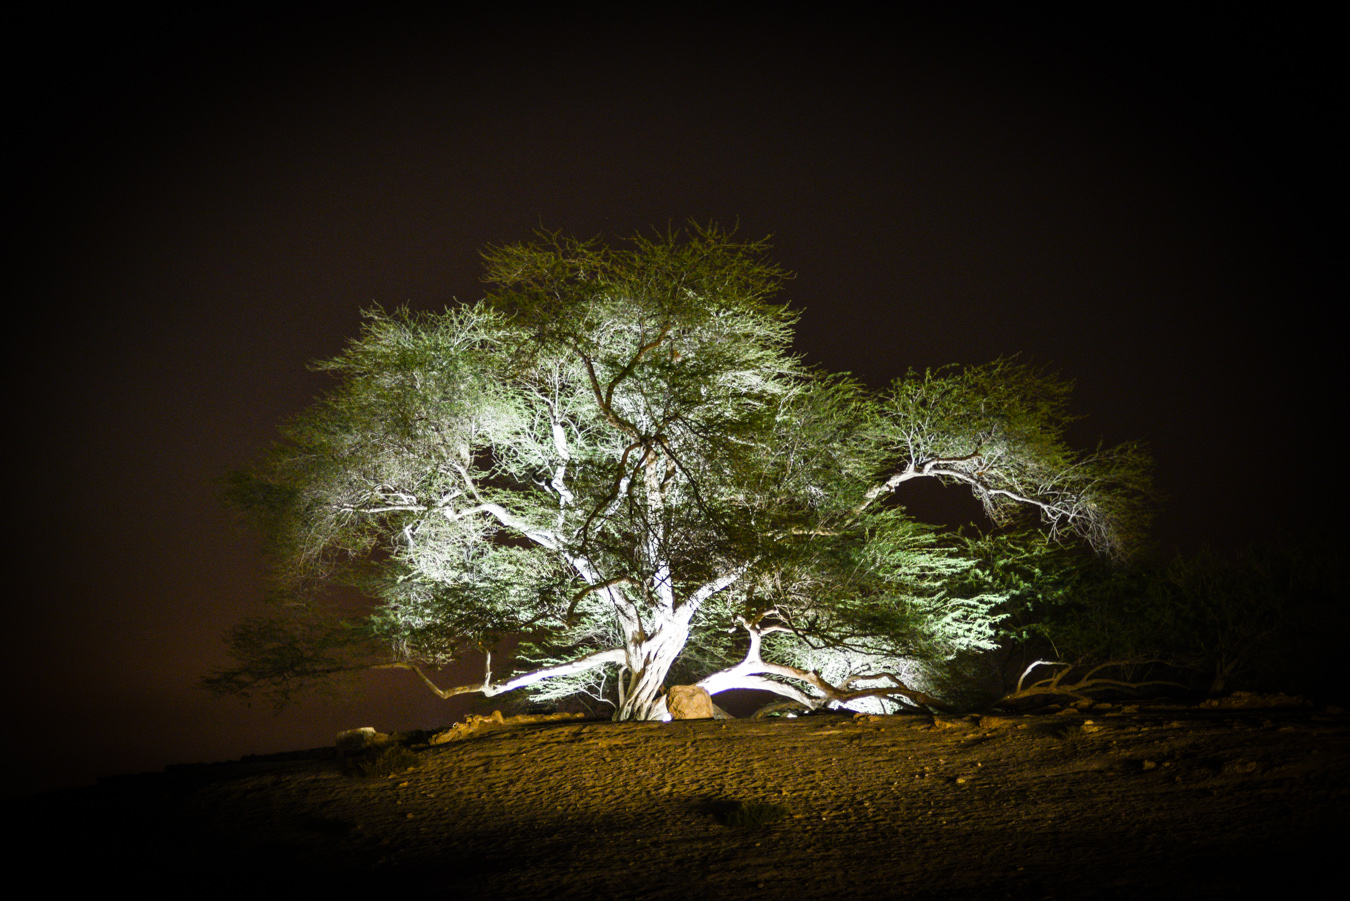 The tree of life in Bahrain